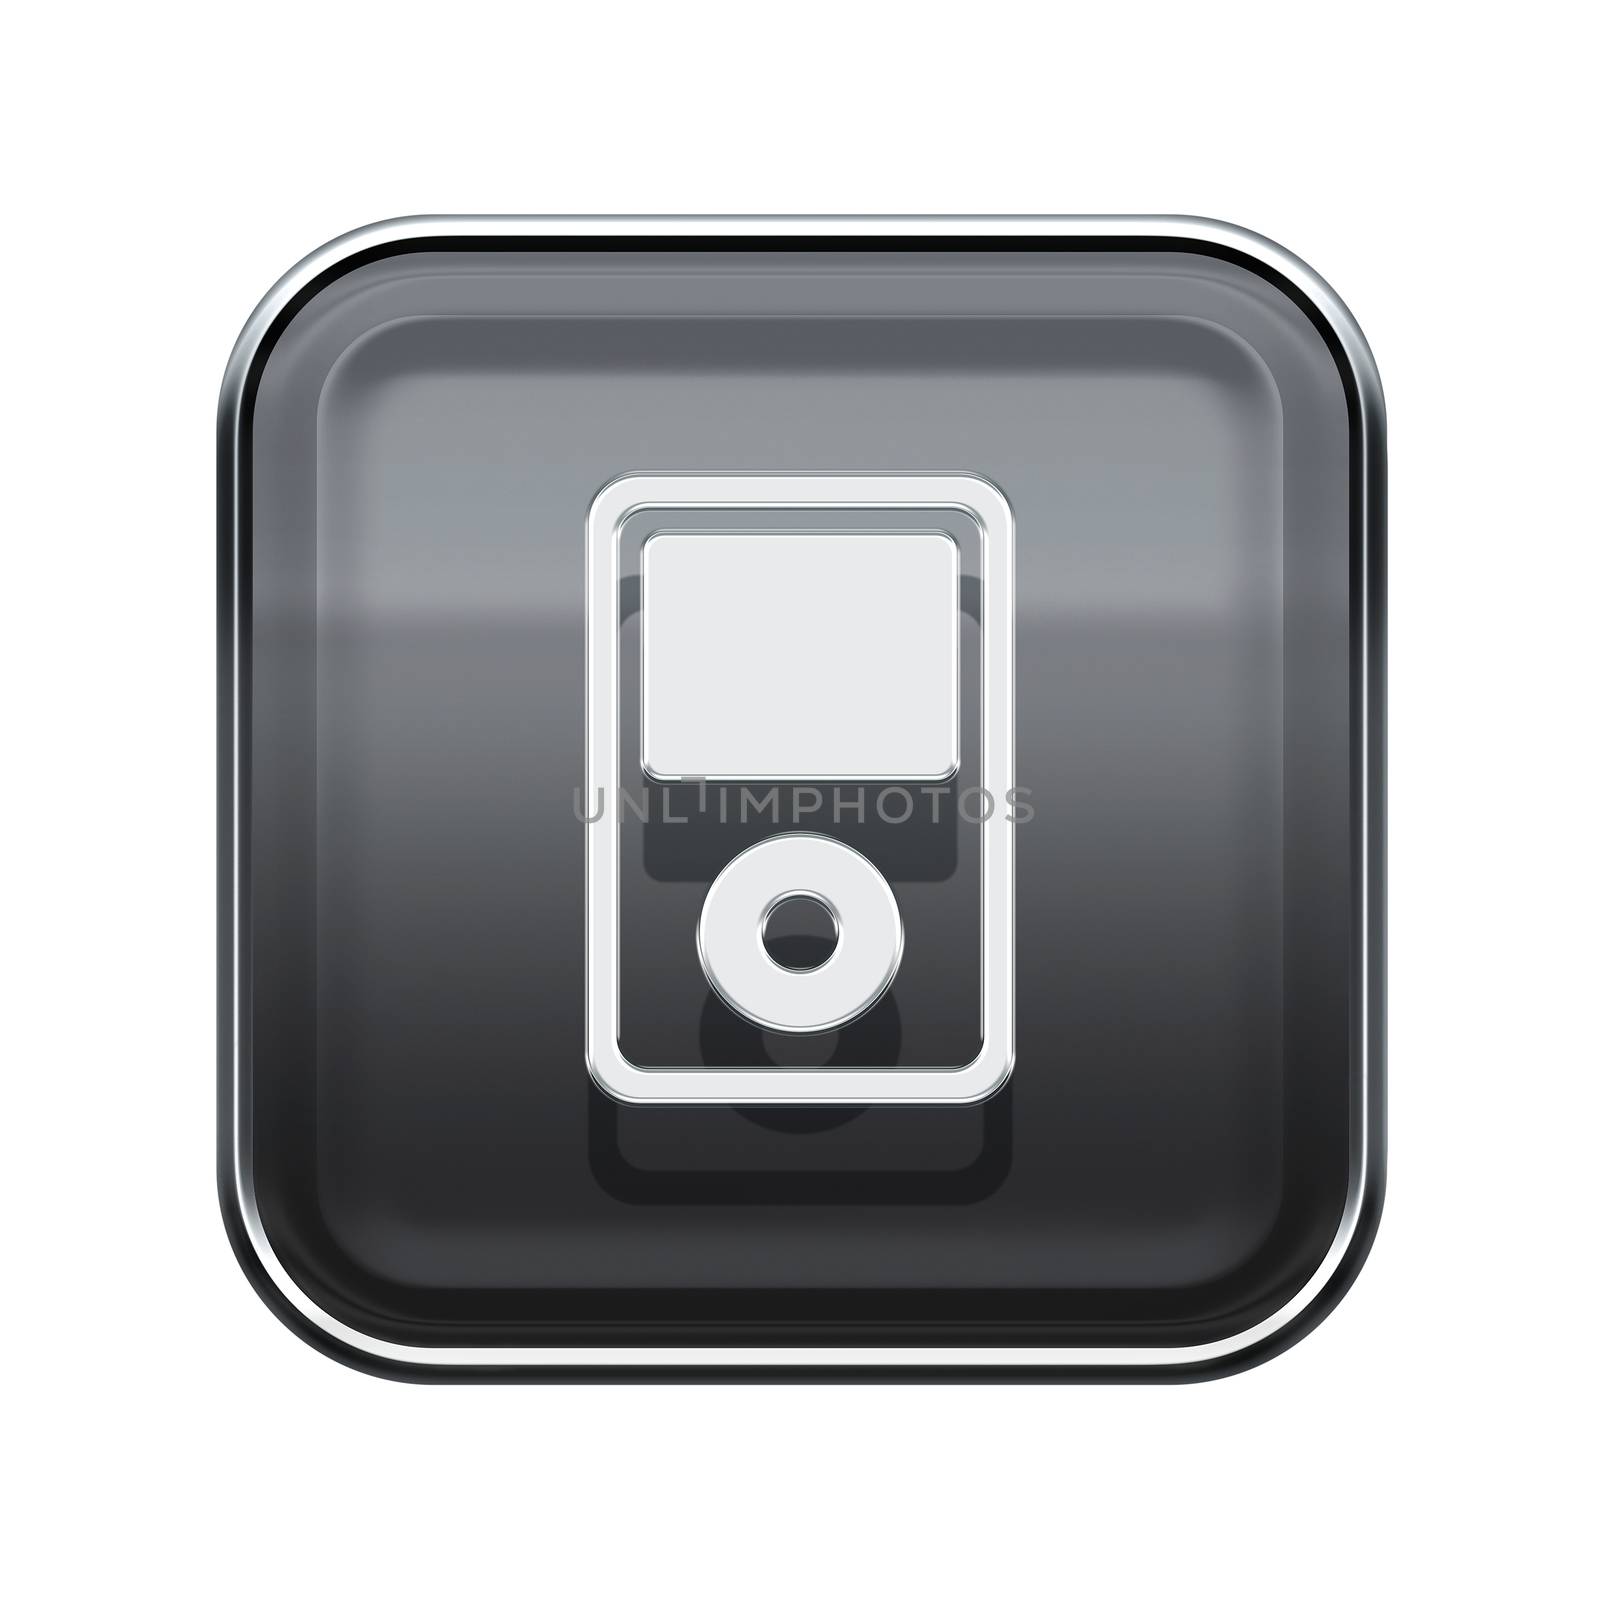 mp3 player glossy grey, isolated on white background